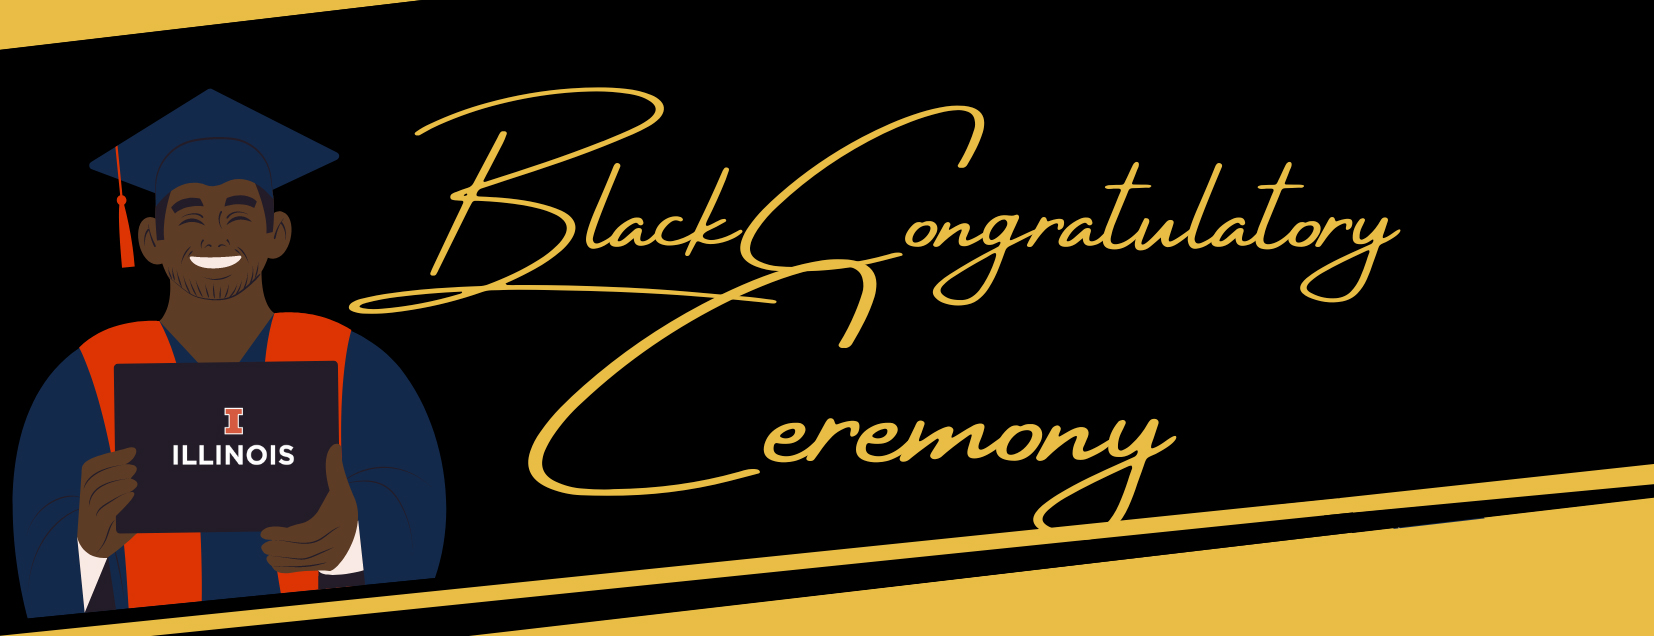 Black Congratulatory Celebration header image with illustration of black male graduate holding diploma and wearing cap and gown